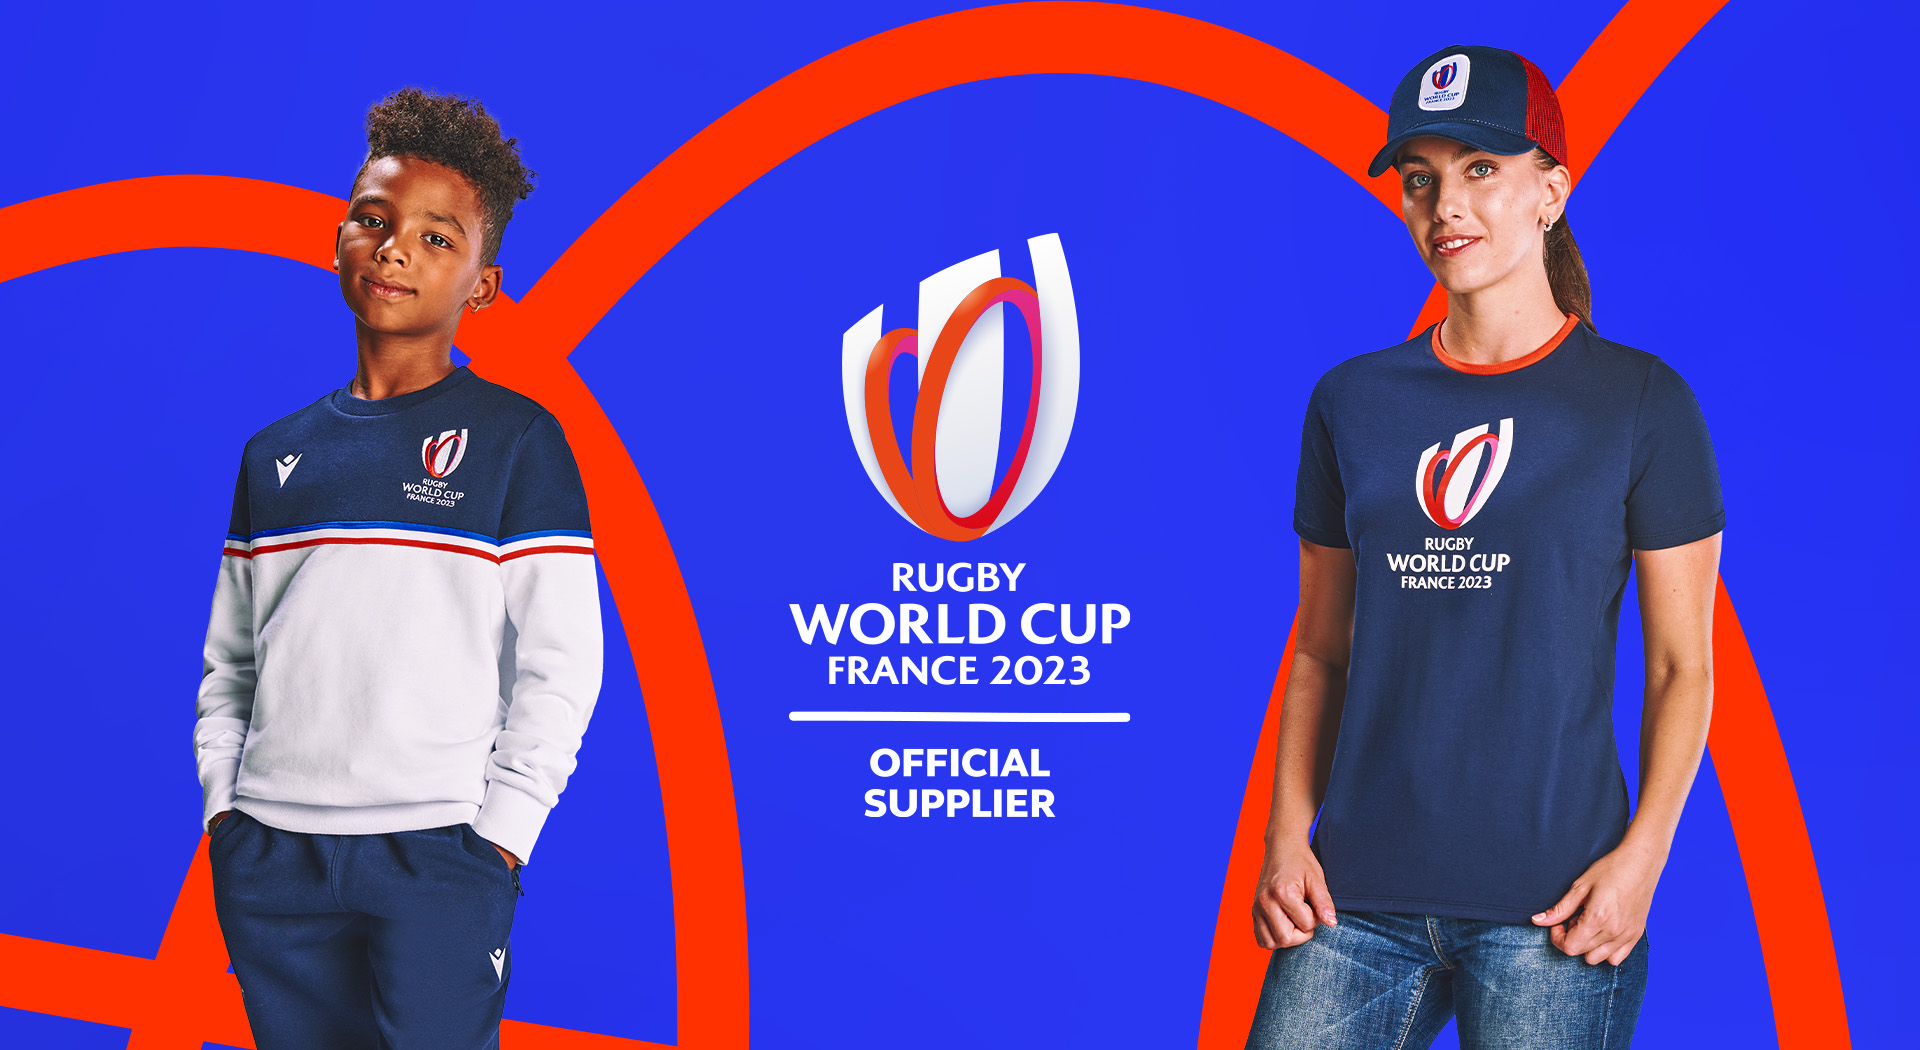 Macron Passion, style, and elegance: Macron presents official merchandise line for Rugby World Cup 2023 in France | Bild 1